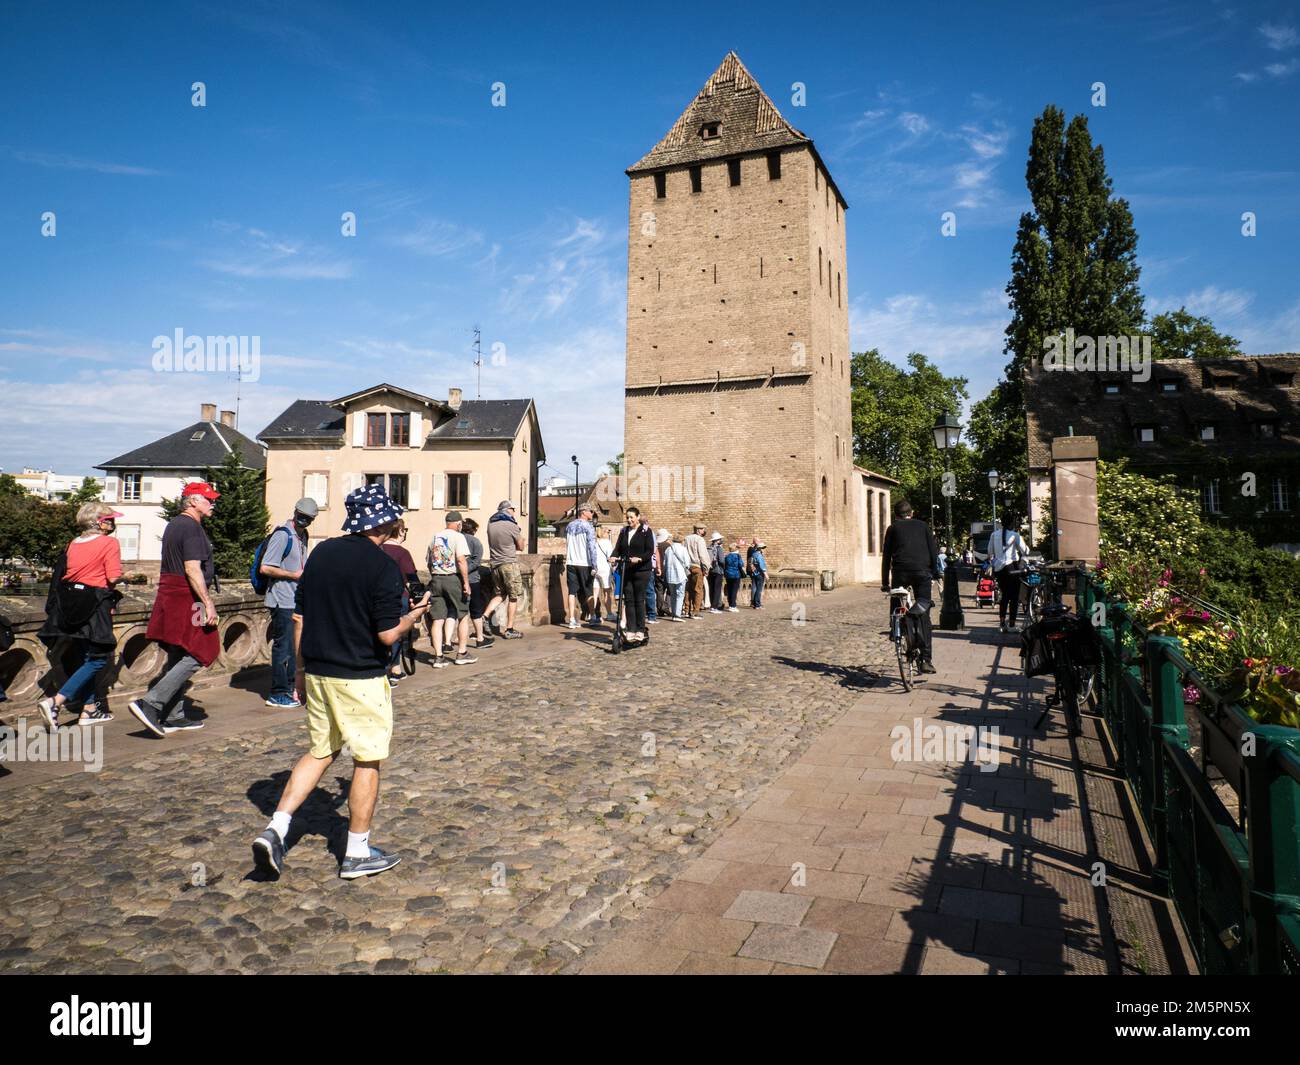 A formerly covered bridge and tower in Strasbourg, France Stock Photo